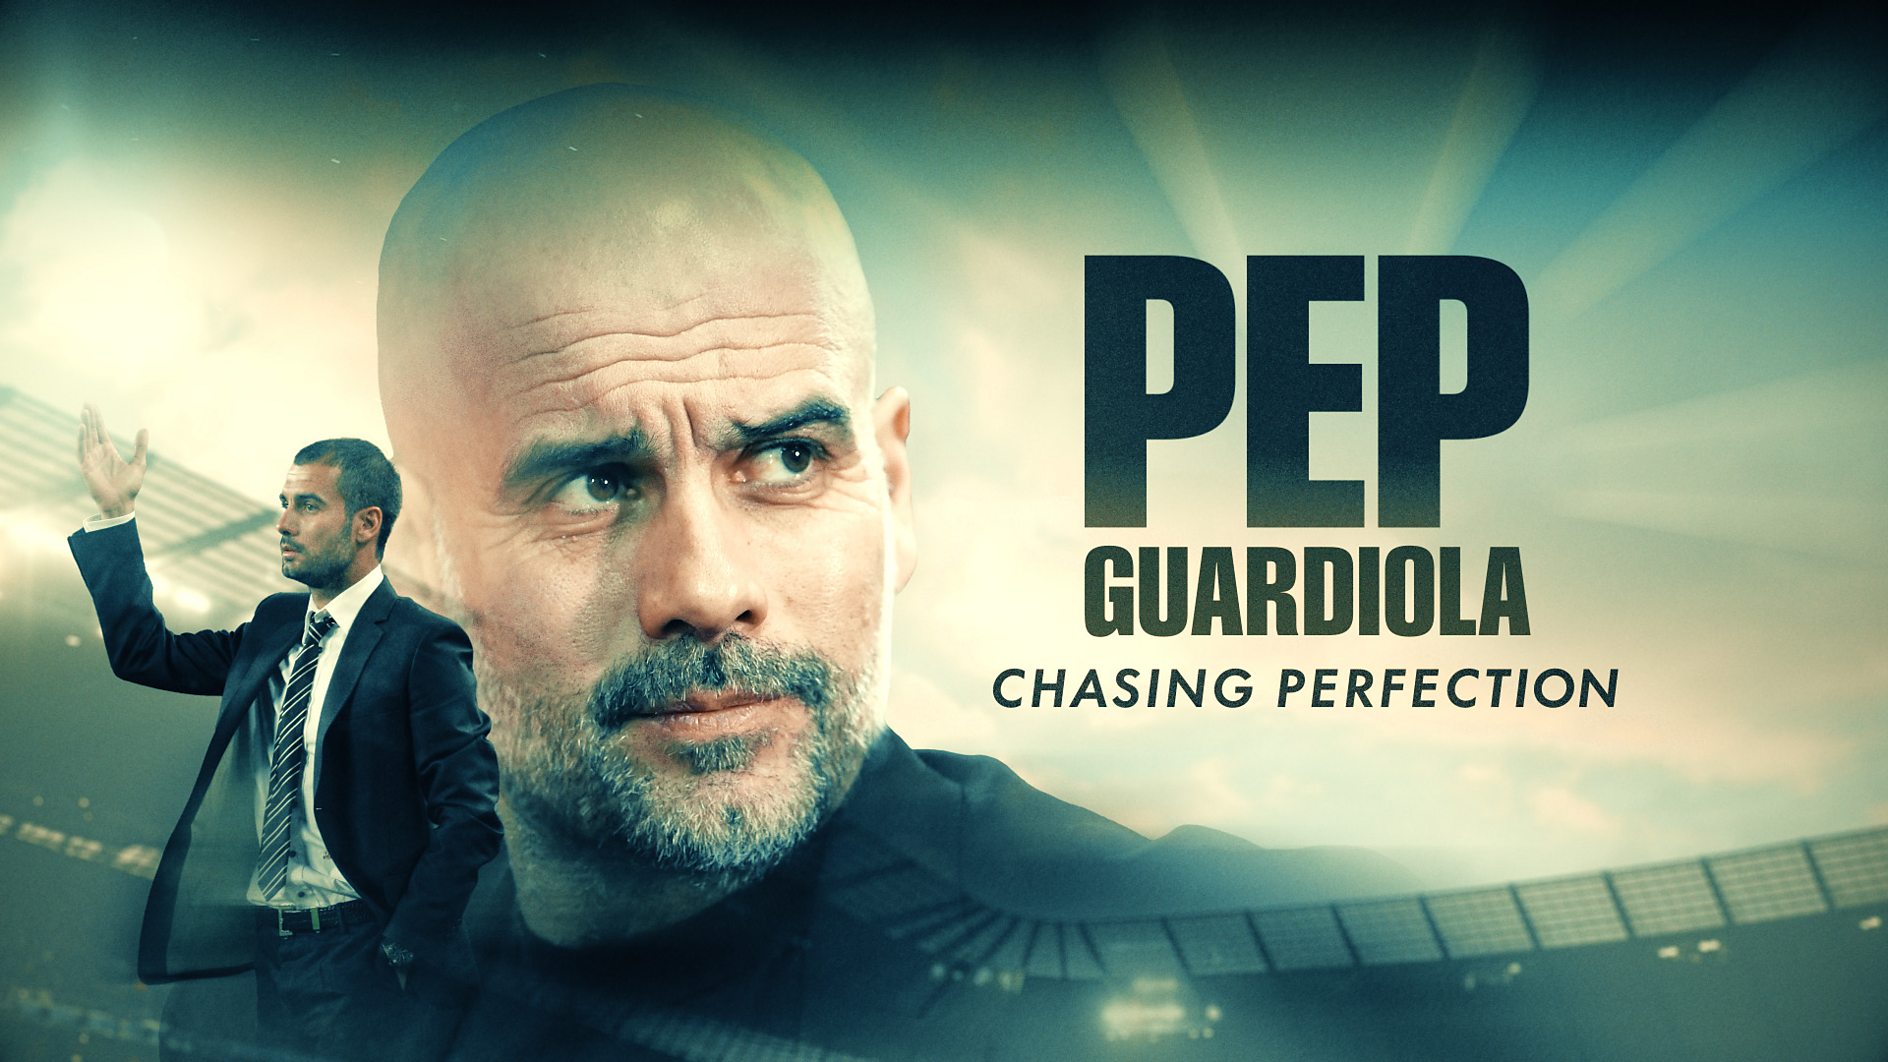 Pep Guardiola: Chasing Perfection is coming to BBC One, iPlayer and BBC Sounds